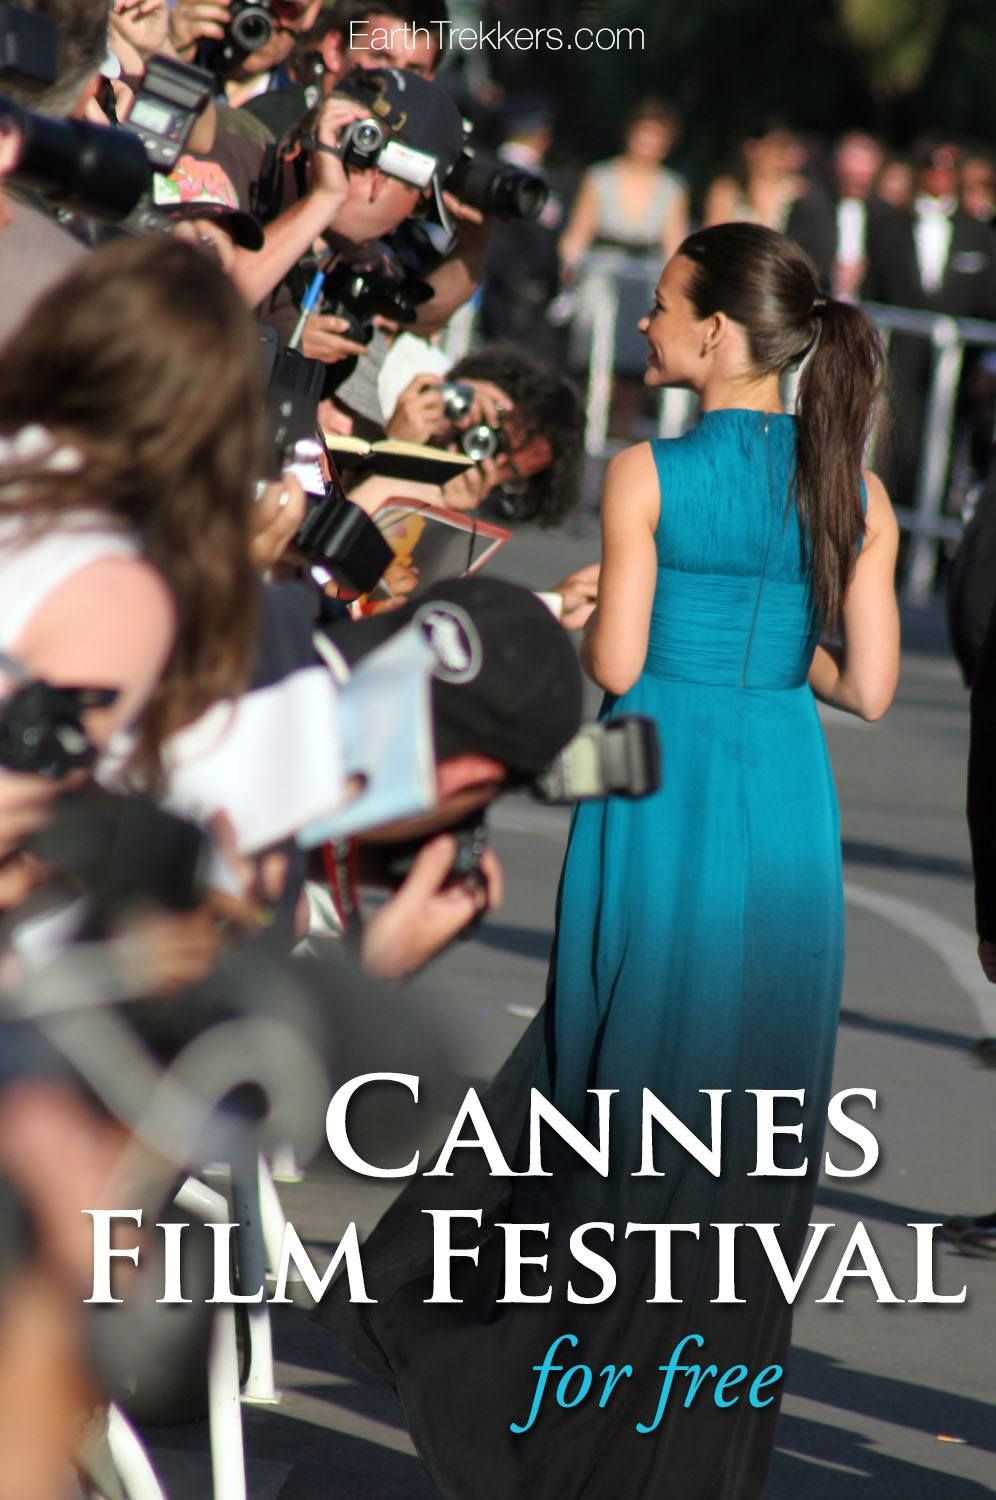 Joining the Paparazzi during the Cannes Film Festival Earth Trekkers